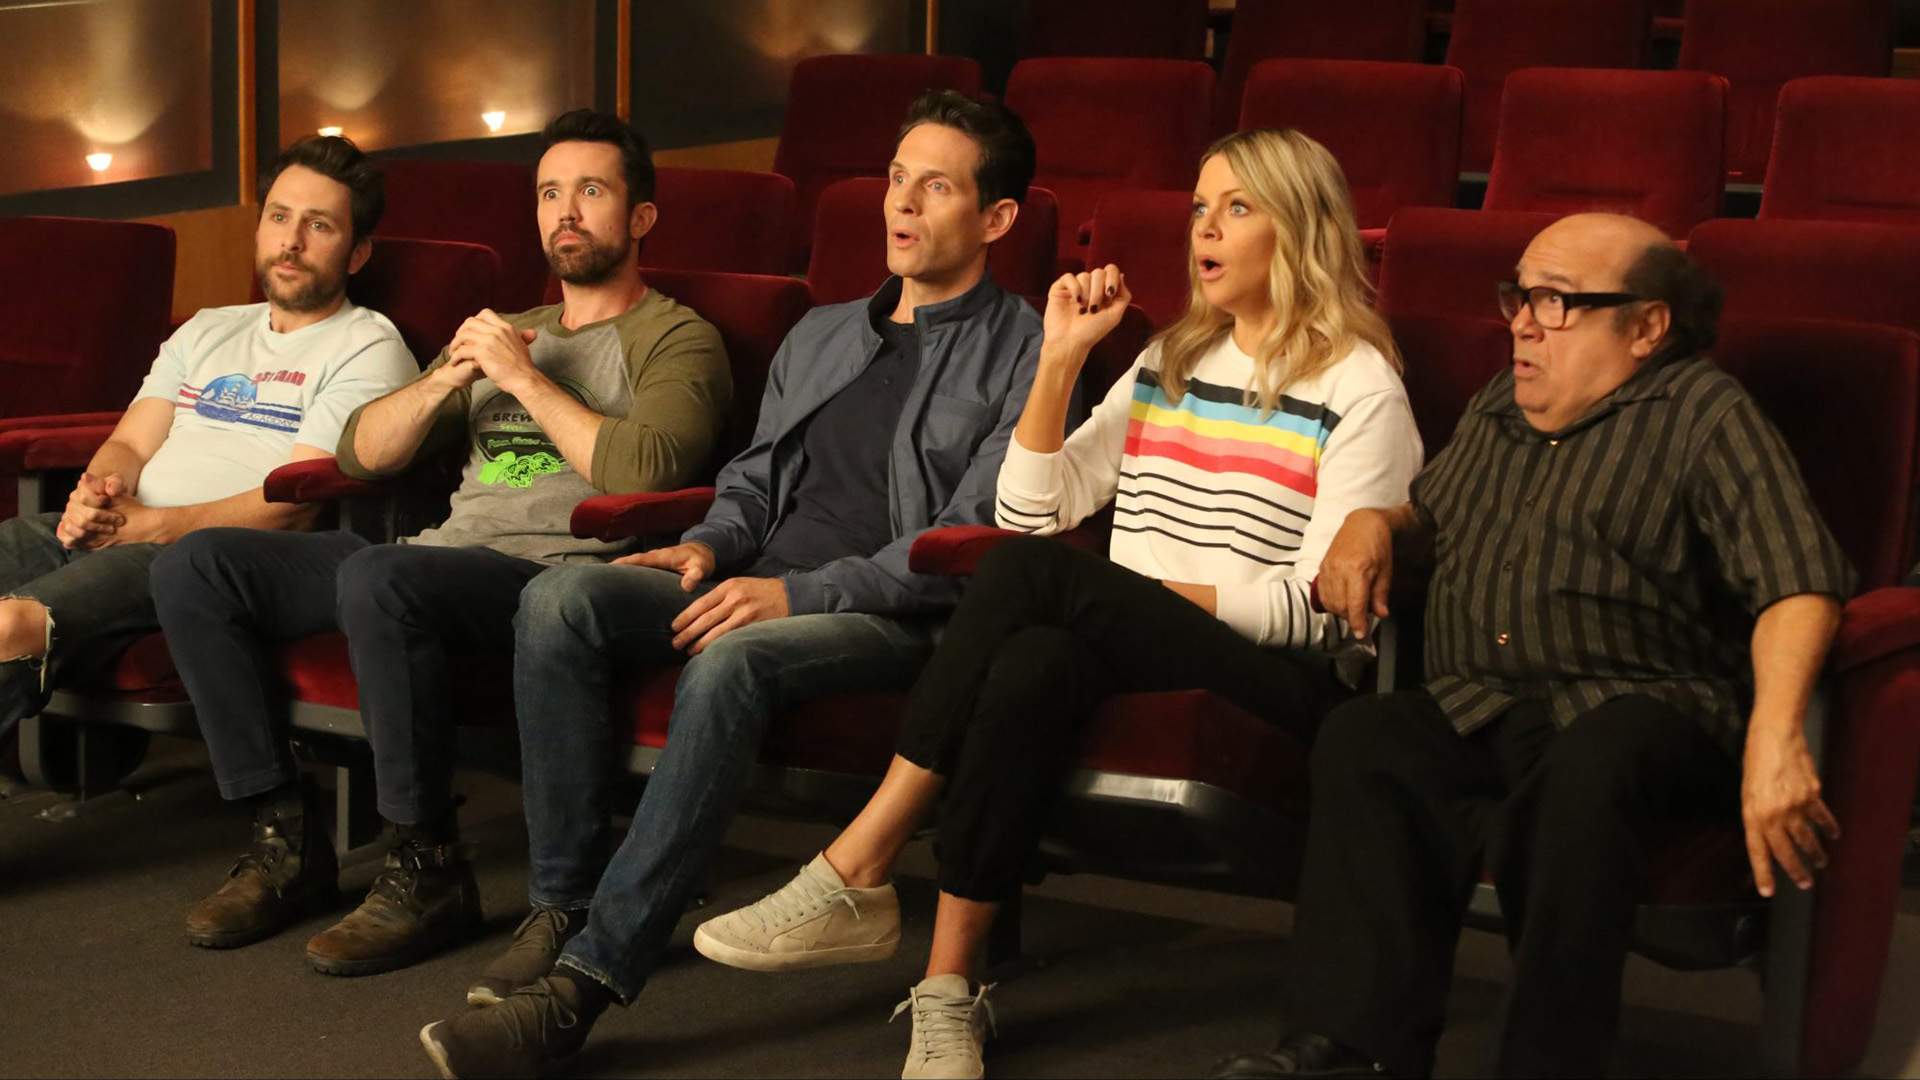 You Can Now Stream All 15 Seasons of 'It's Always Sunny in Philadelphia' Thanks to Disney+